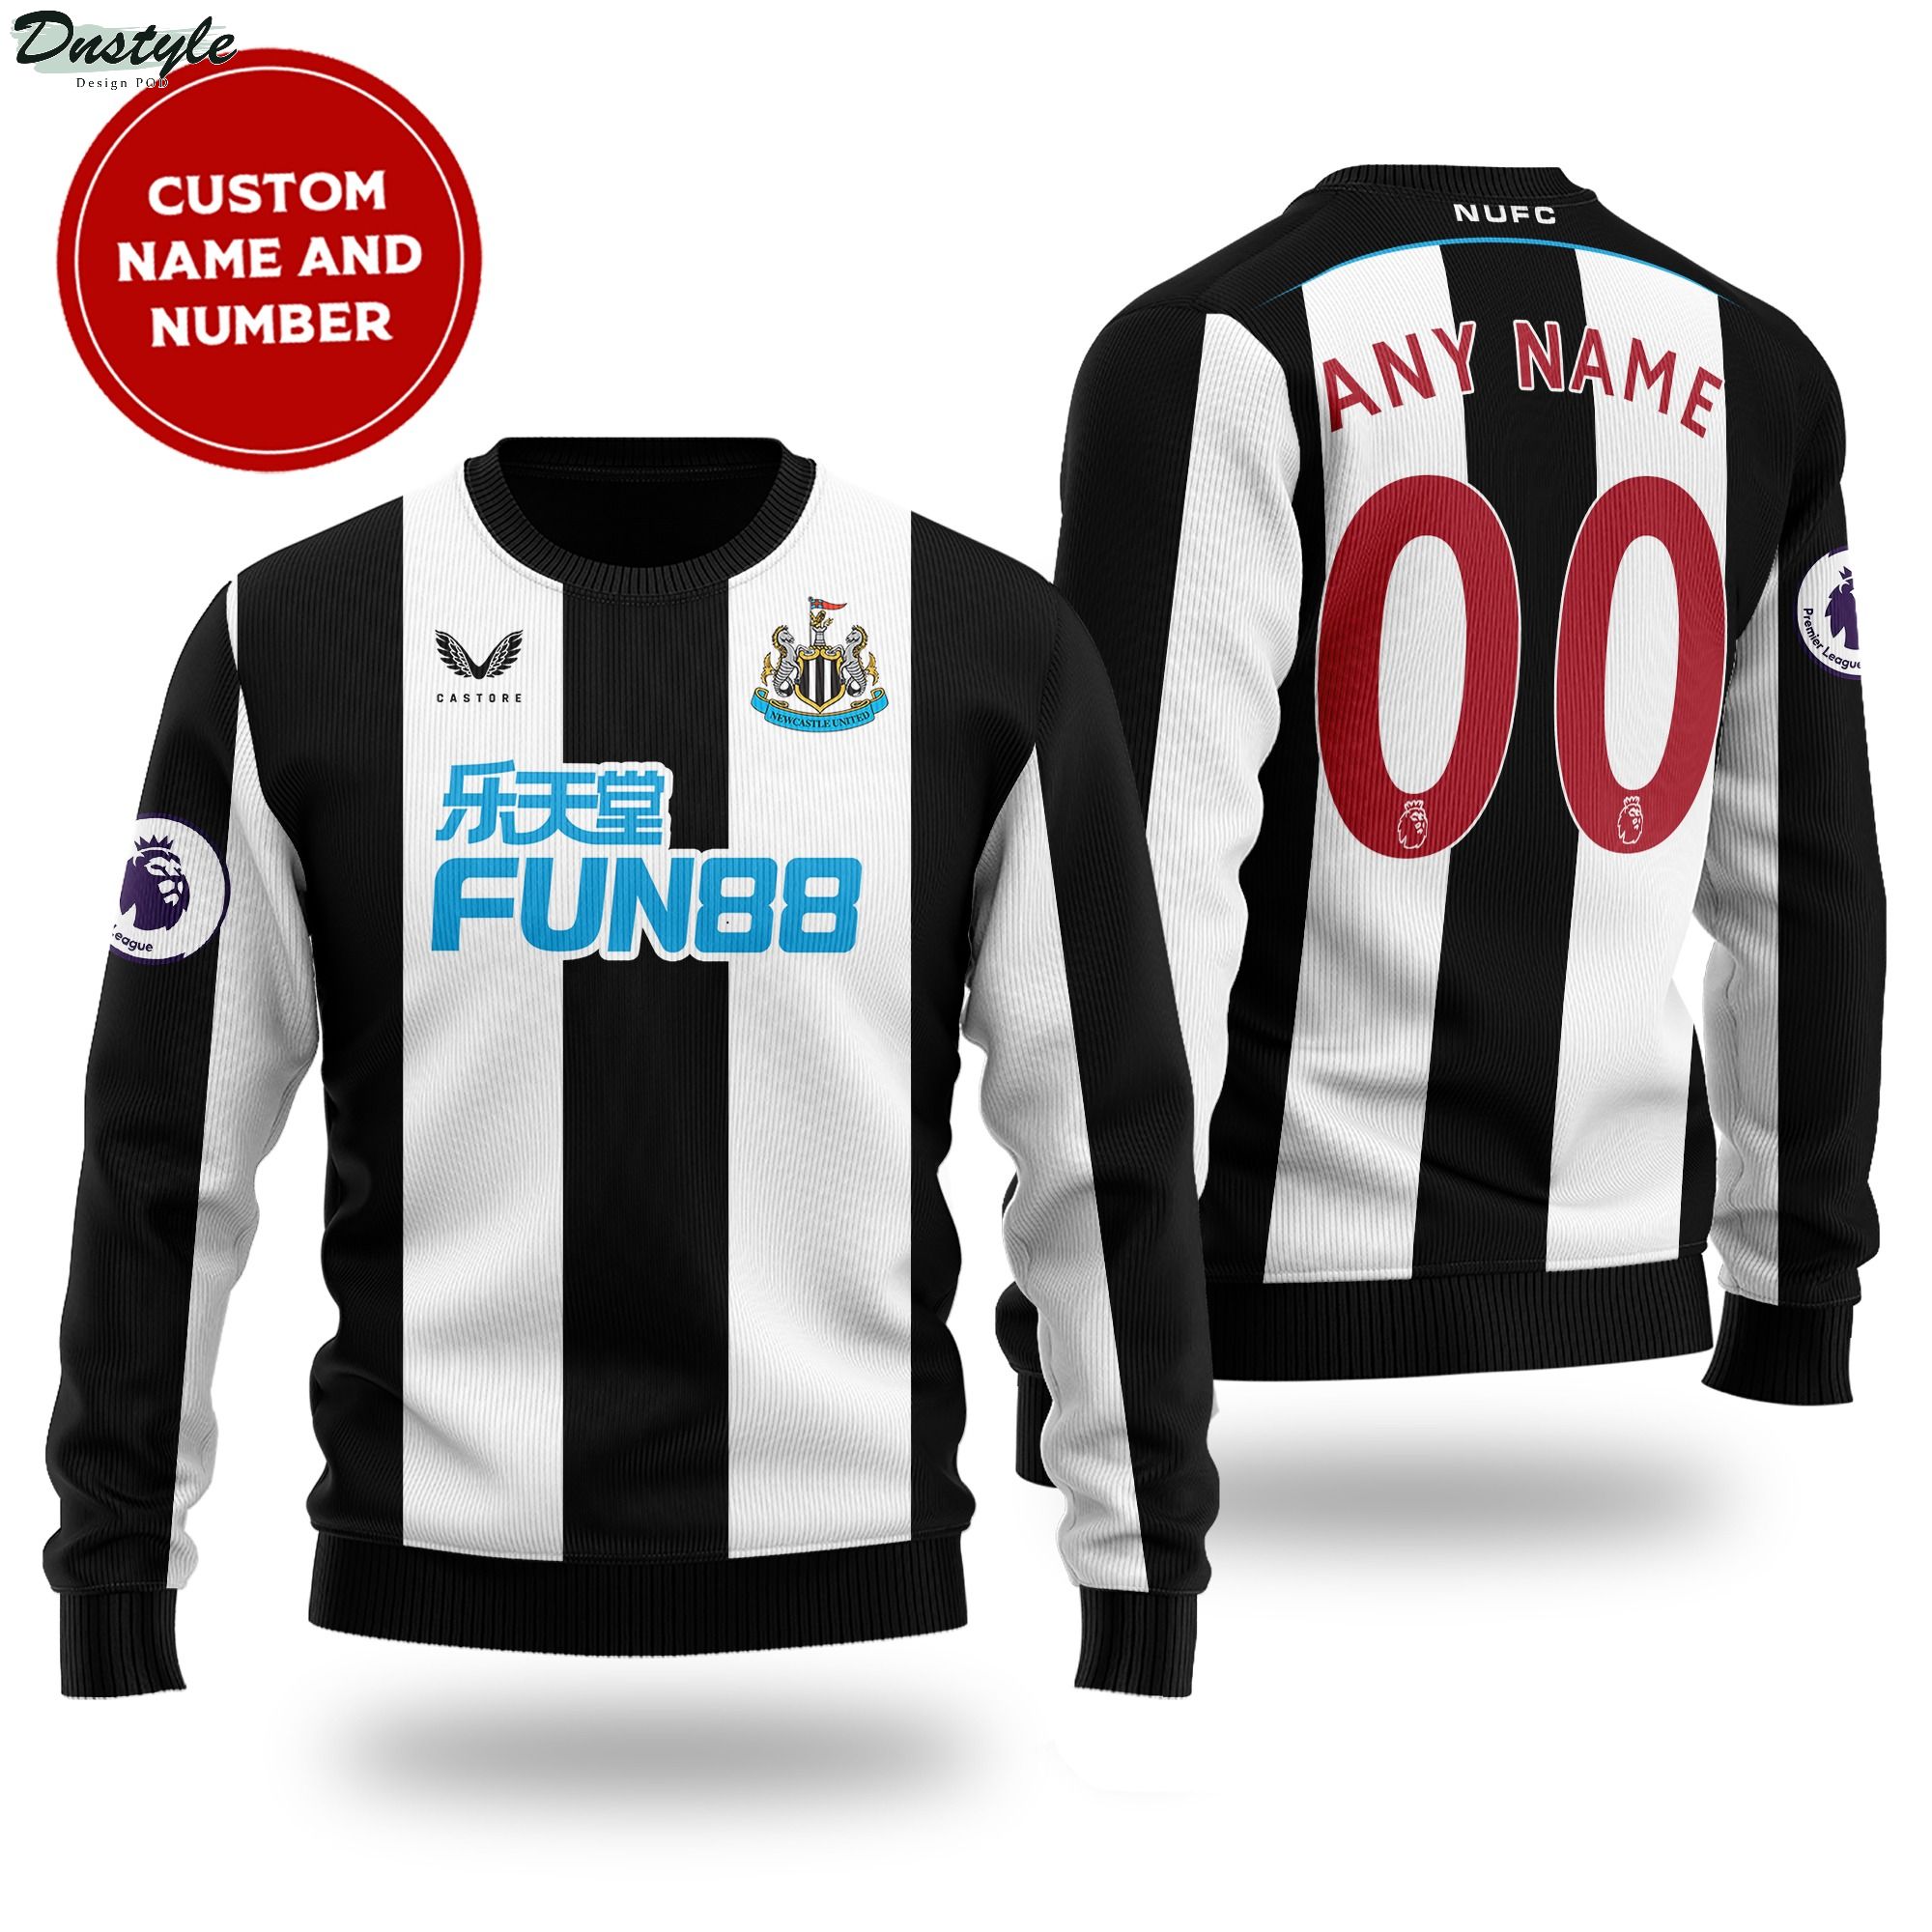 Newcastle United custom name and number ugly sweater